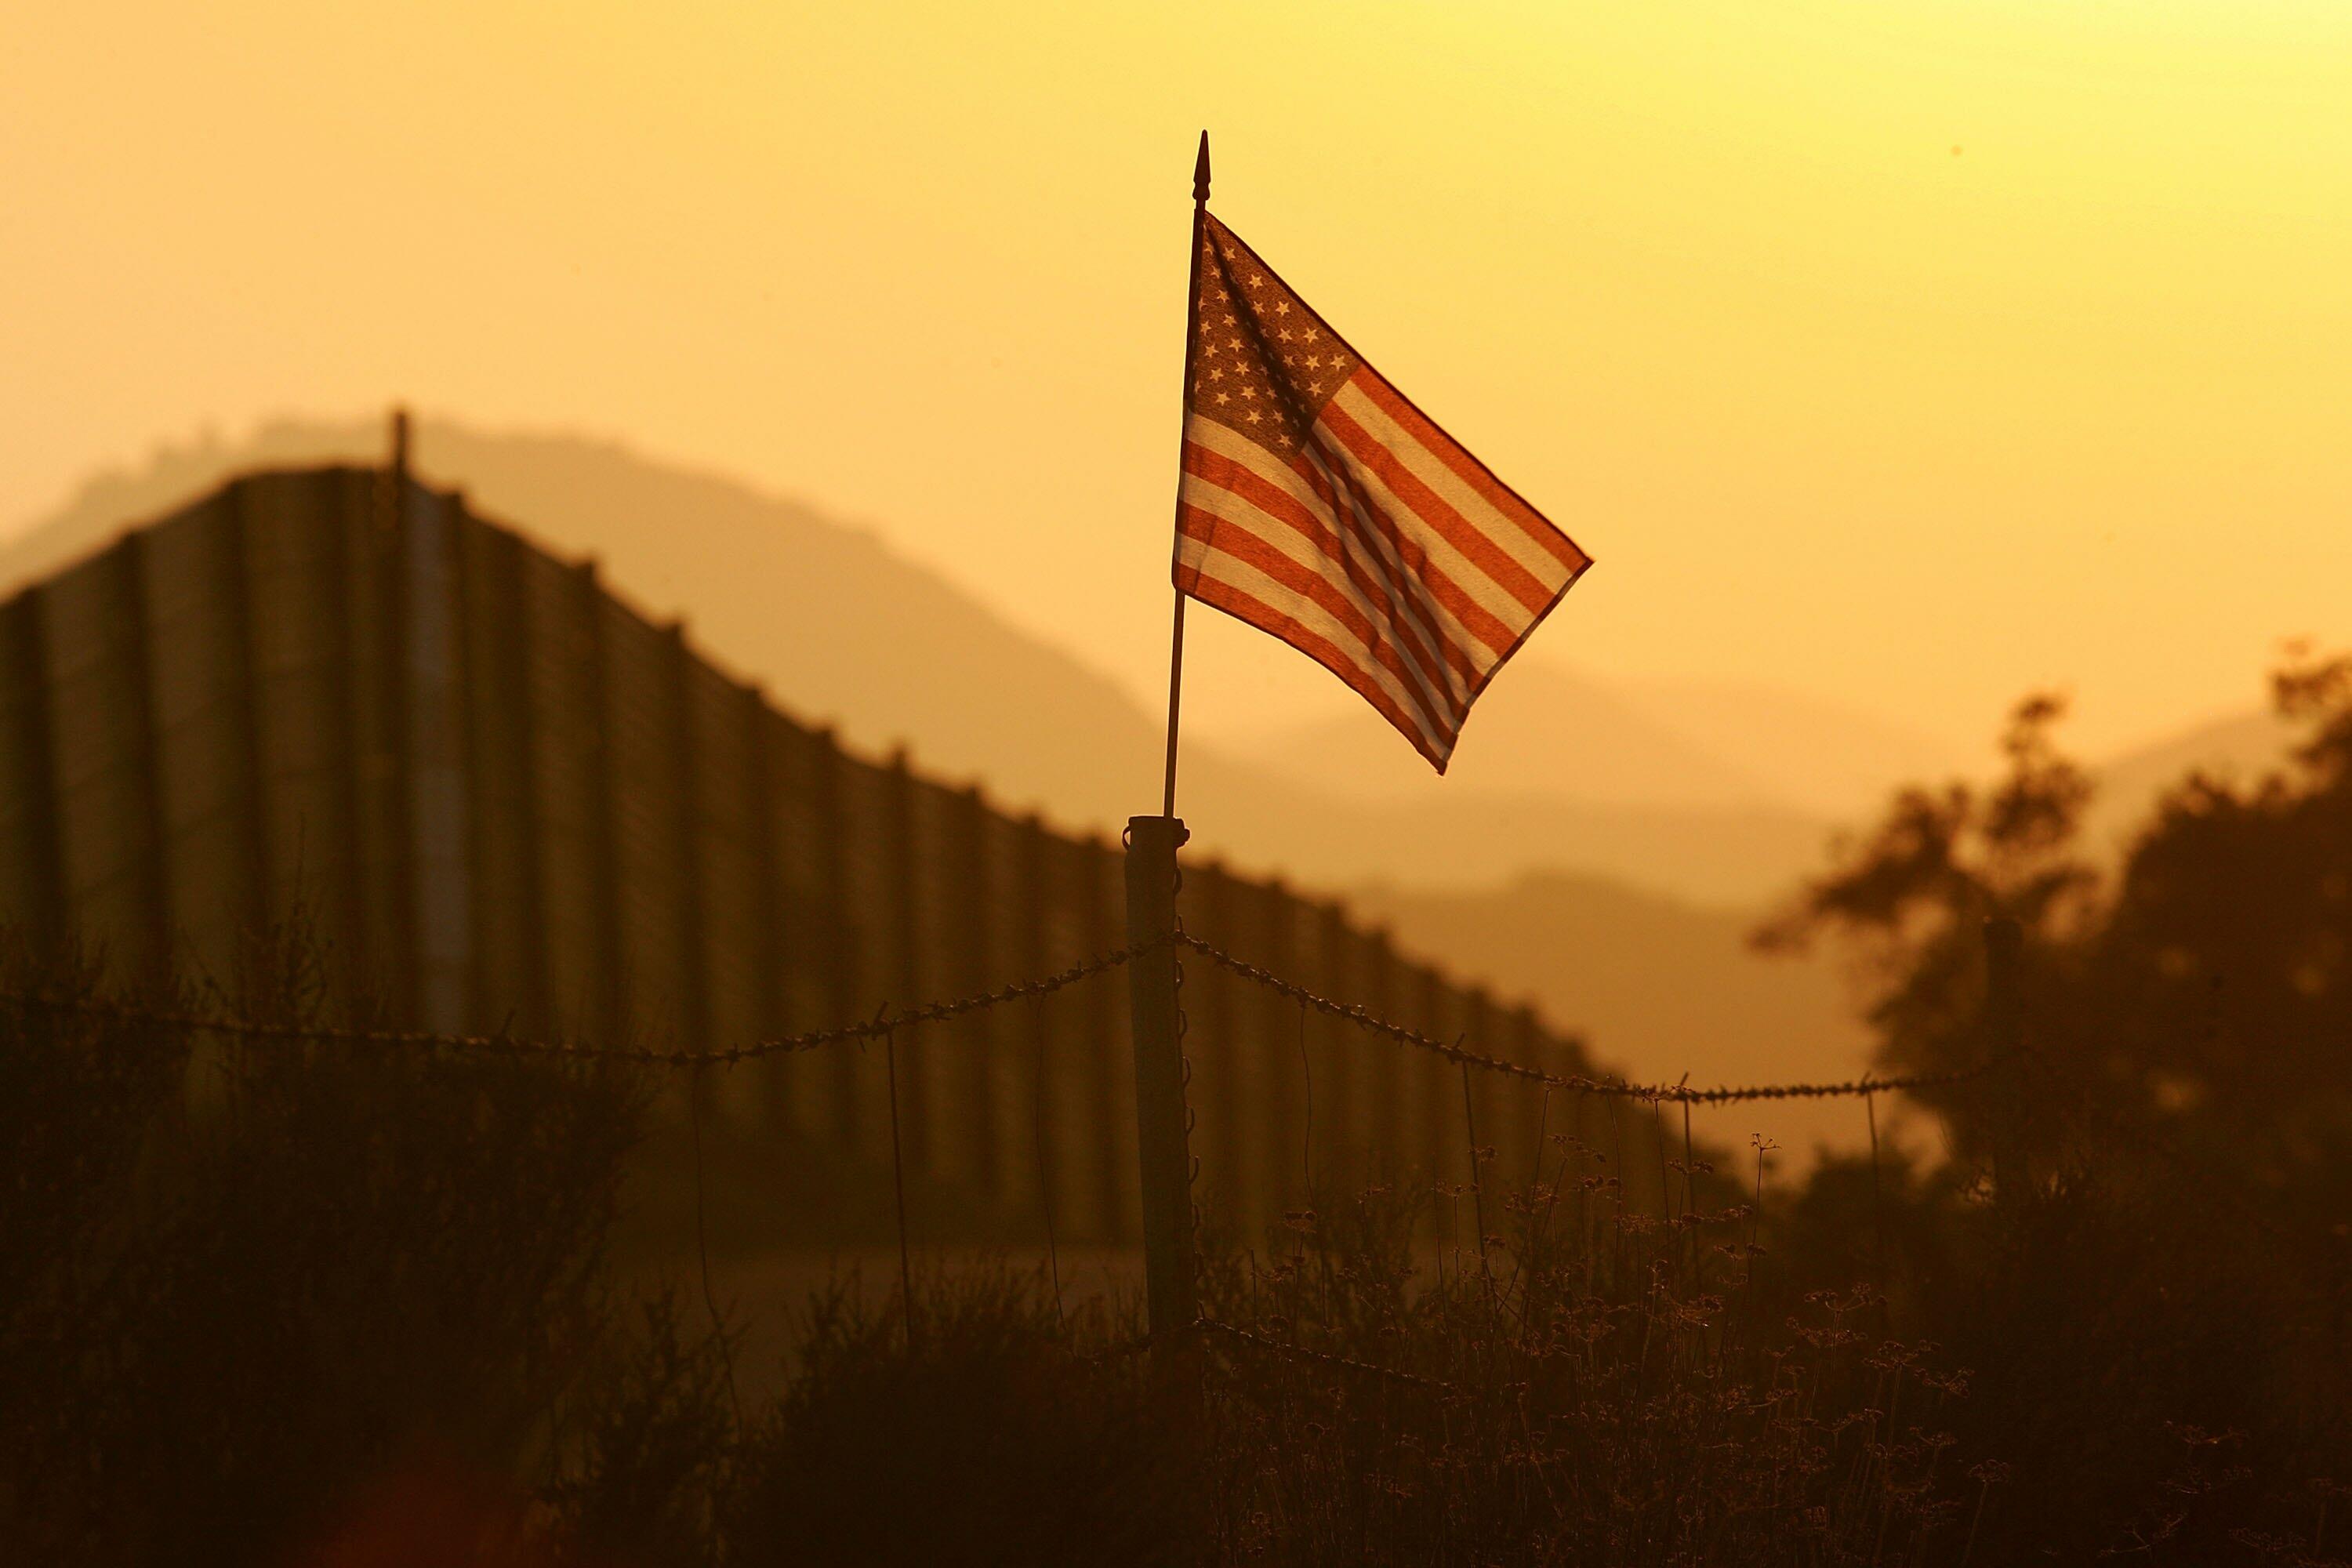 CAMPO, CA - OCTOBER 08:  A U.S. flag put up by activists who oppose illegal immigration flies near the US-Mexico border fence in an area where they search for border crossers October 8, 2006 near Campo, California. The activists want the fence expanded in